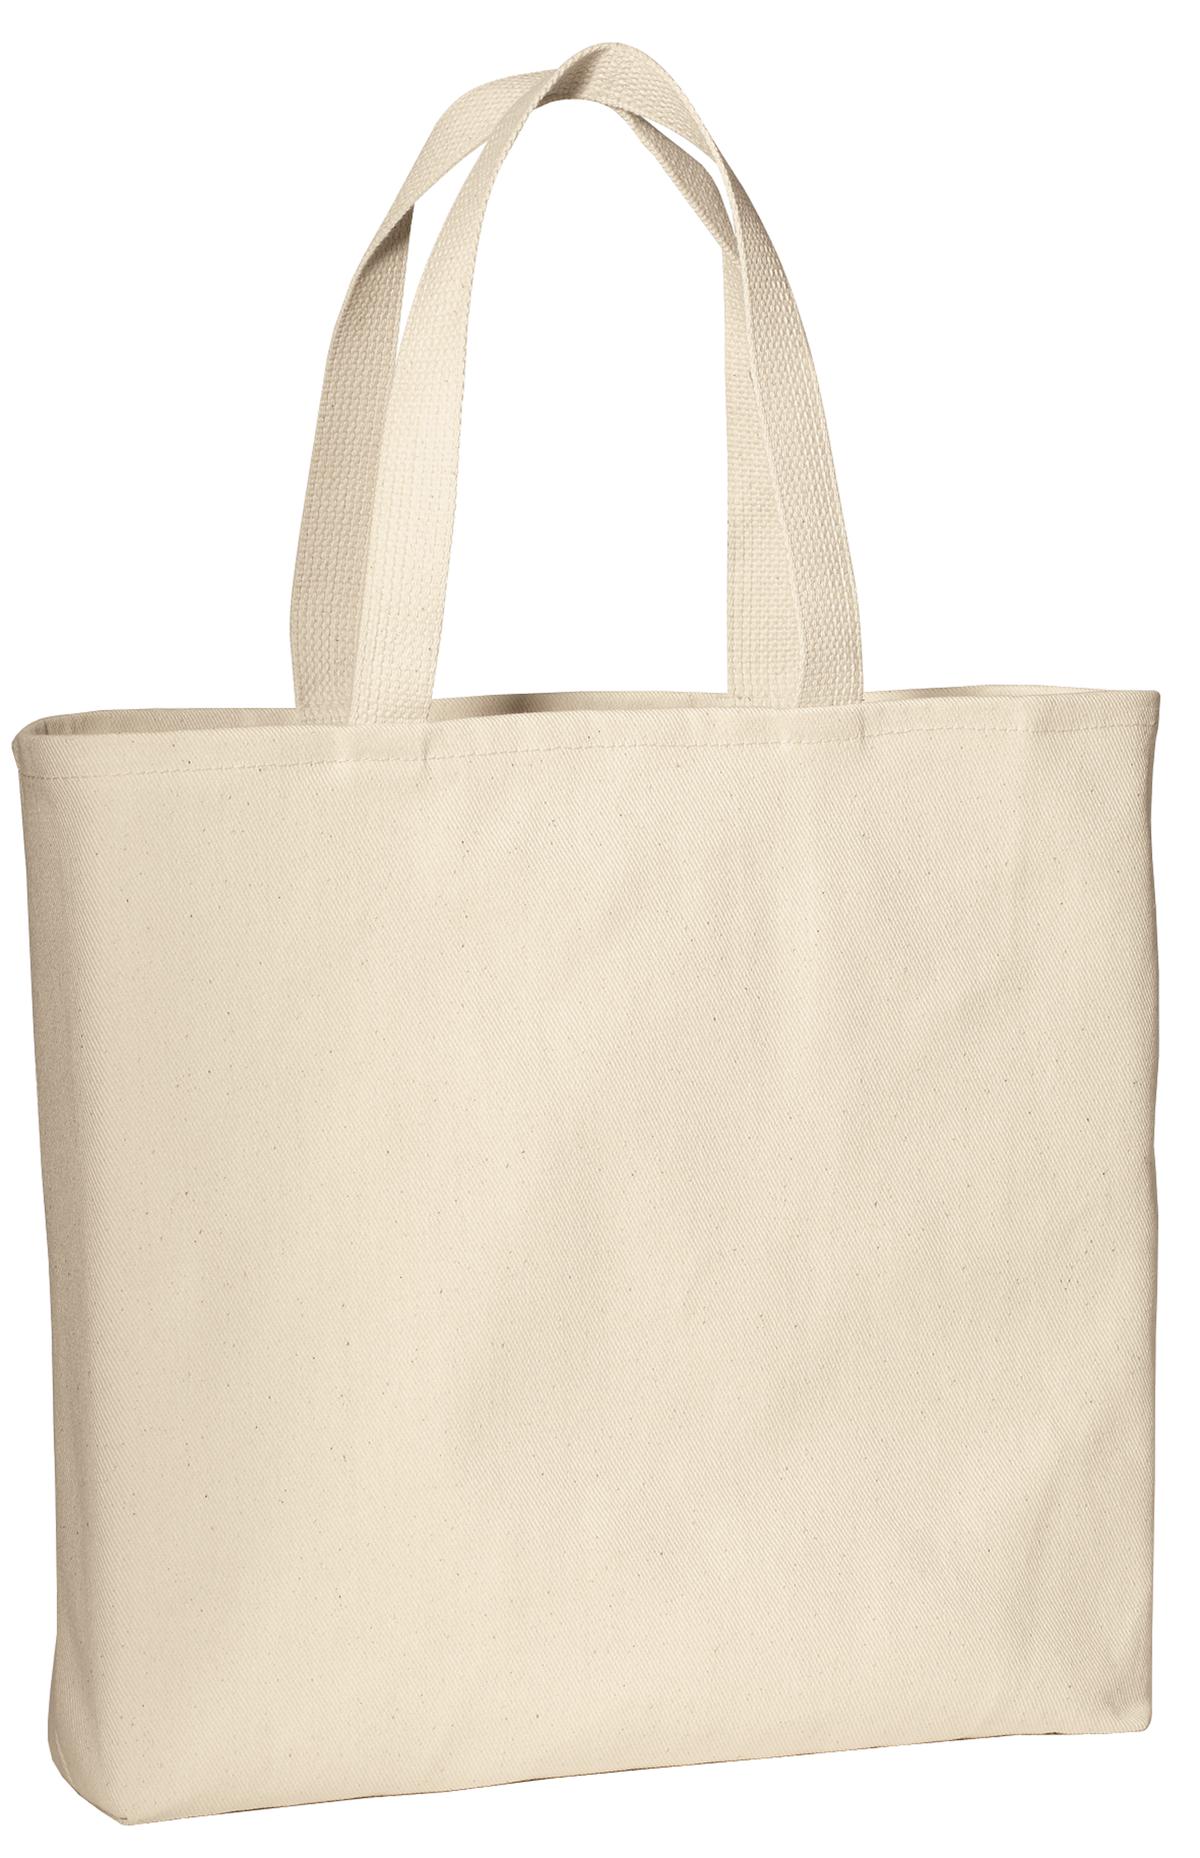 Port Authority - Ideal Twill Convention Tote.  B050